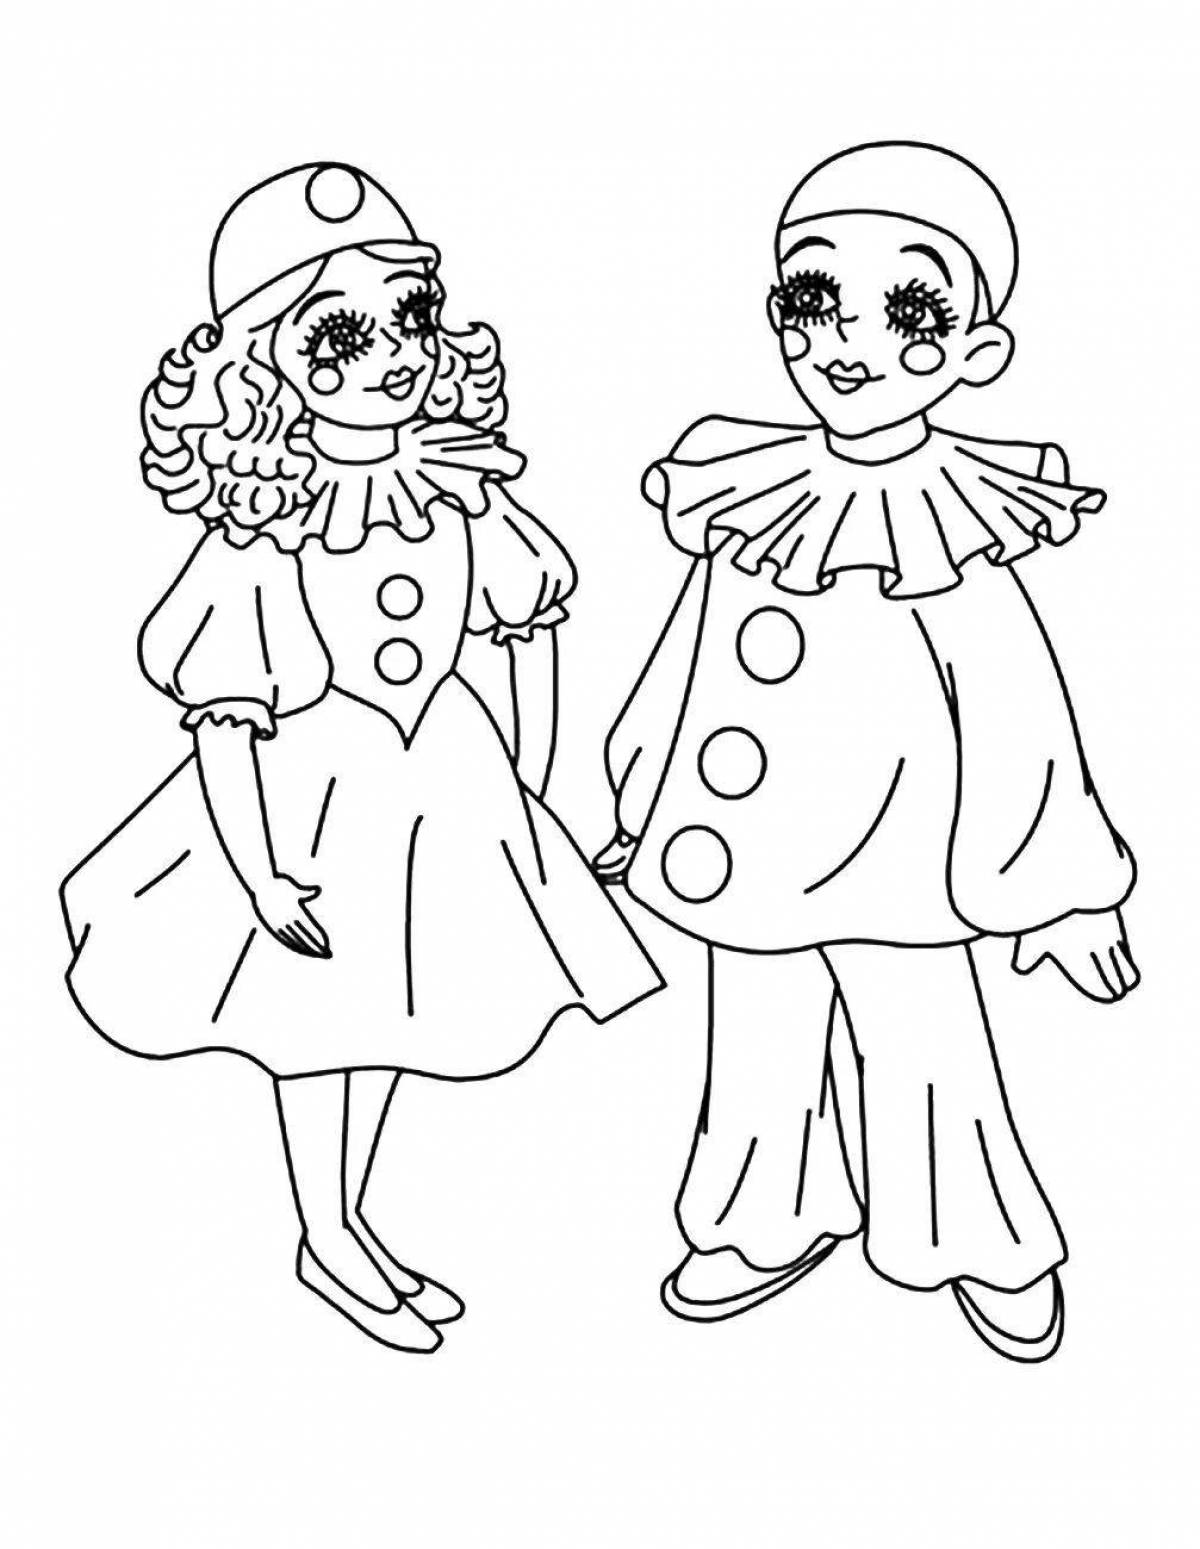 Coloring page spellbinding theatrical costume